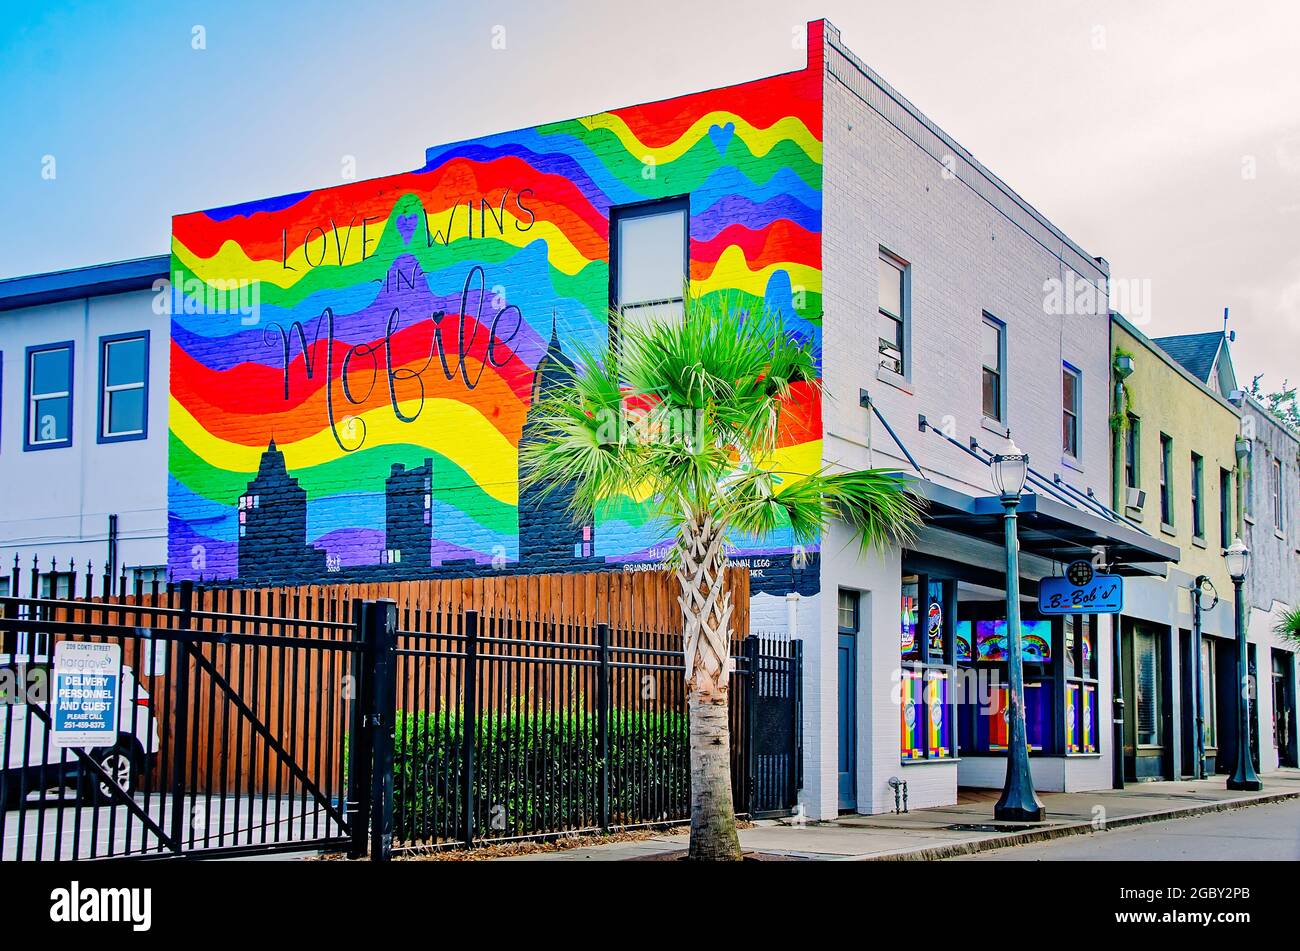 A “love wins” rainbow mural is painted on the wall at B-Bob’s Downtown, Aug. 1, 2021, in Mobile, Alabama. Stock Photo